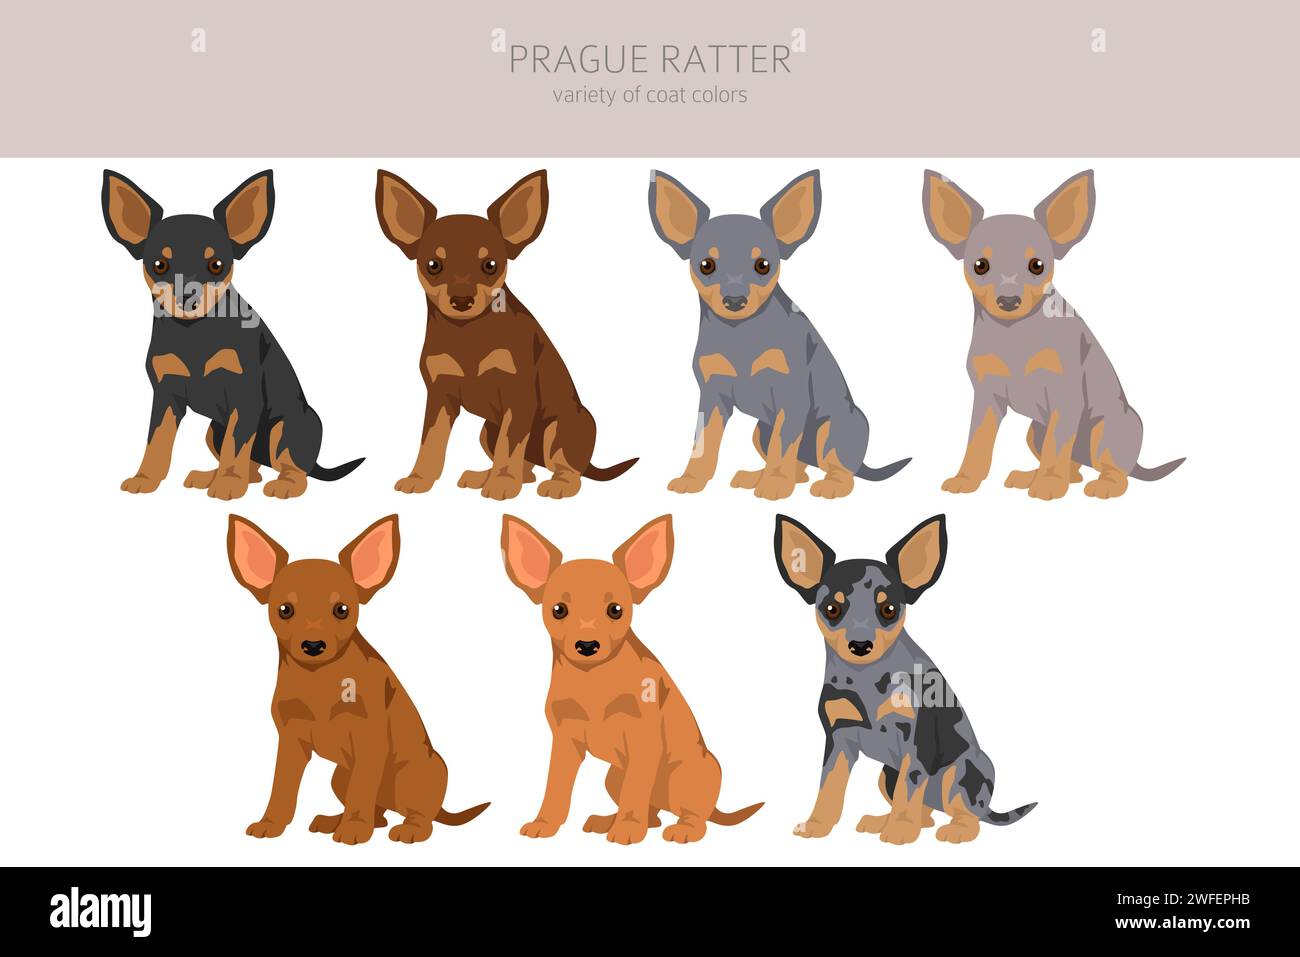 Prague Ratter puppy clipart. All coat colors set.  All dog breeds characteristics infographic. Vector illustration Stock Vector